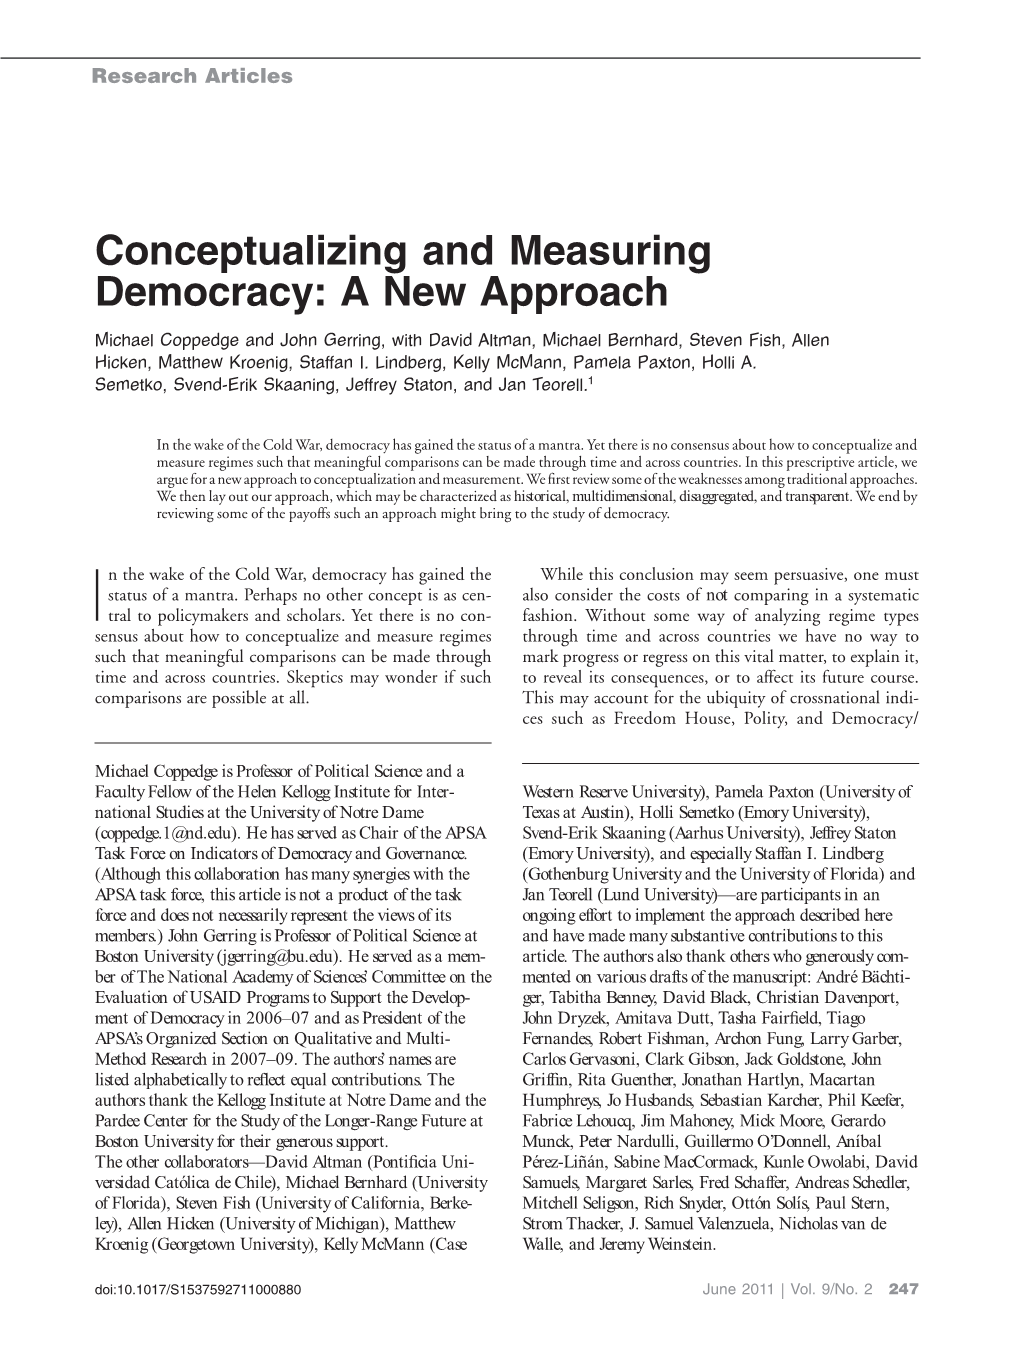 Conceptualizing and Measuring Democracy: a New Approach